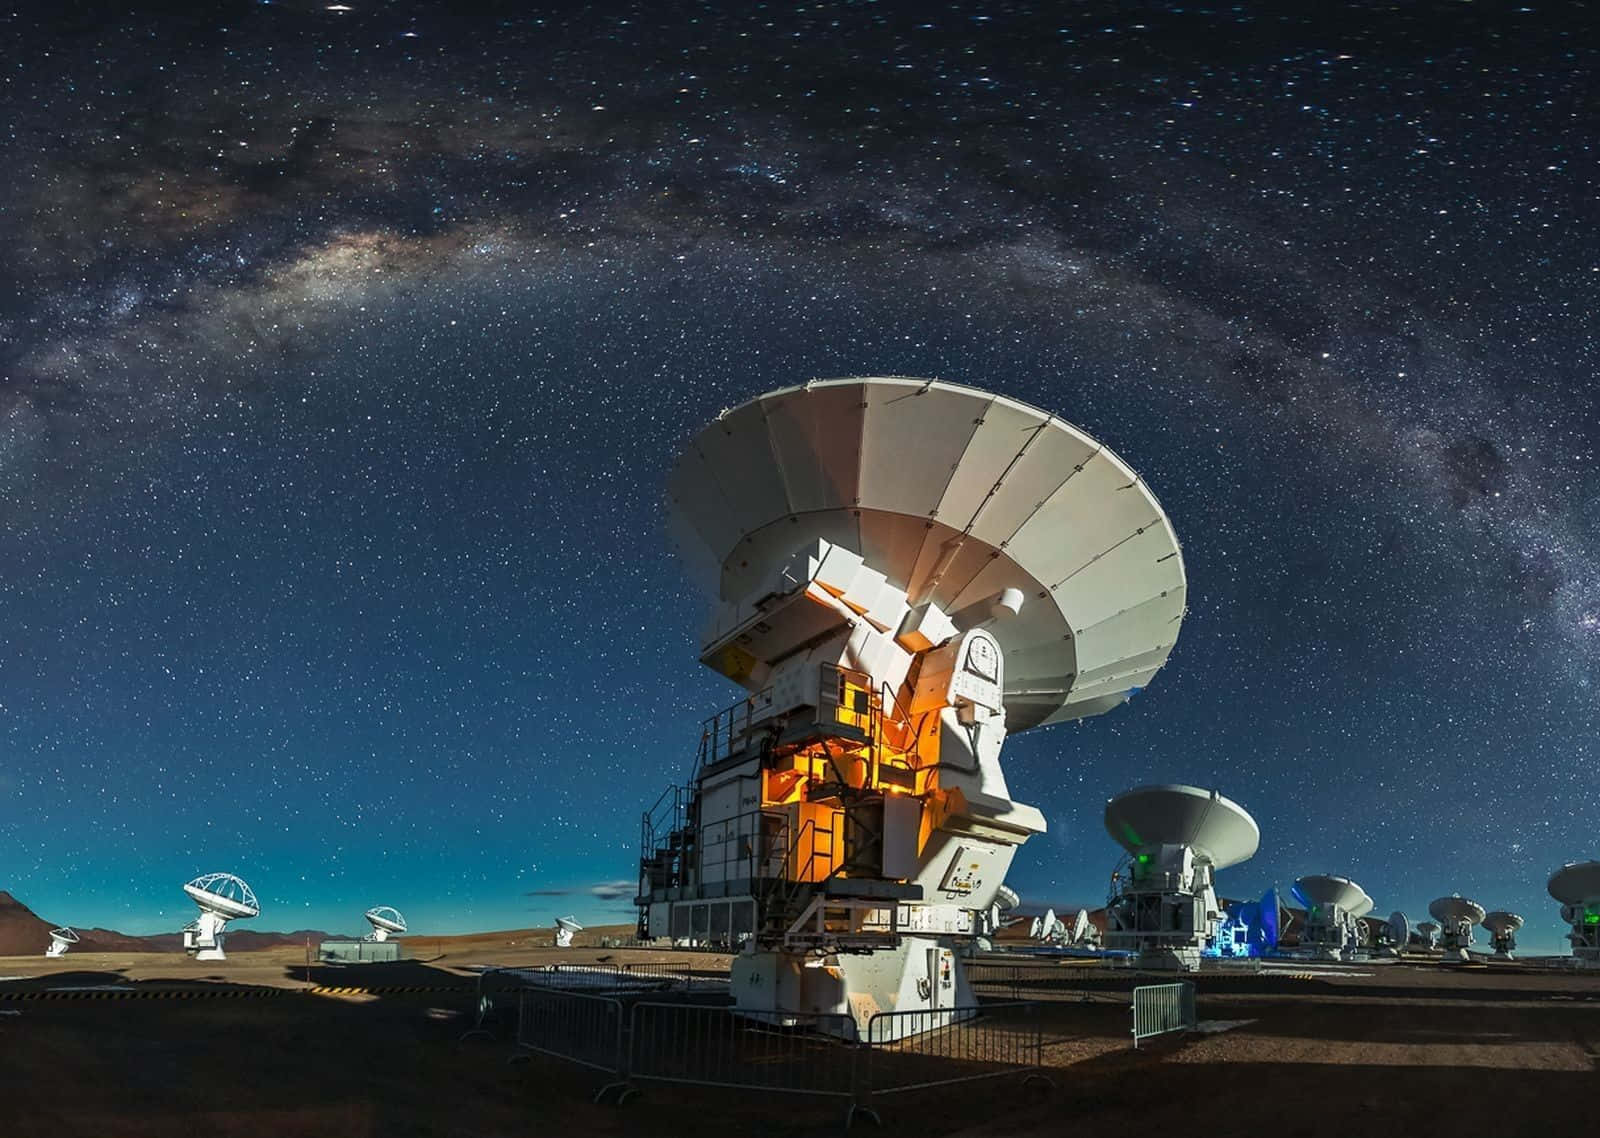 A massive radio telescope scanning the night sky for cosmic mysteries Wallpaper